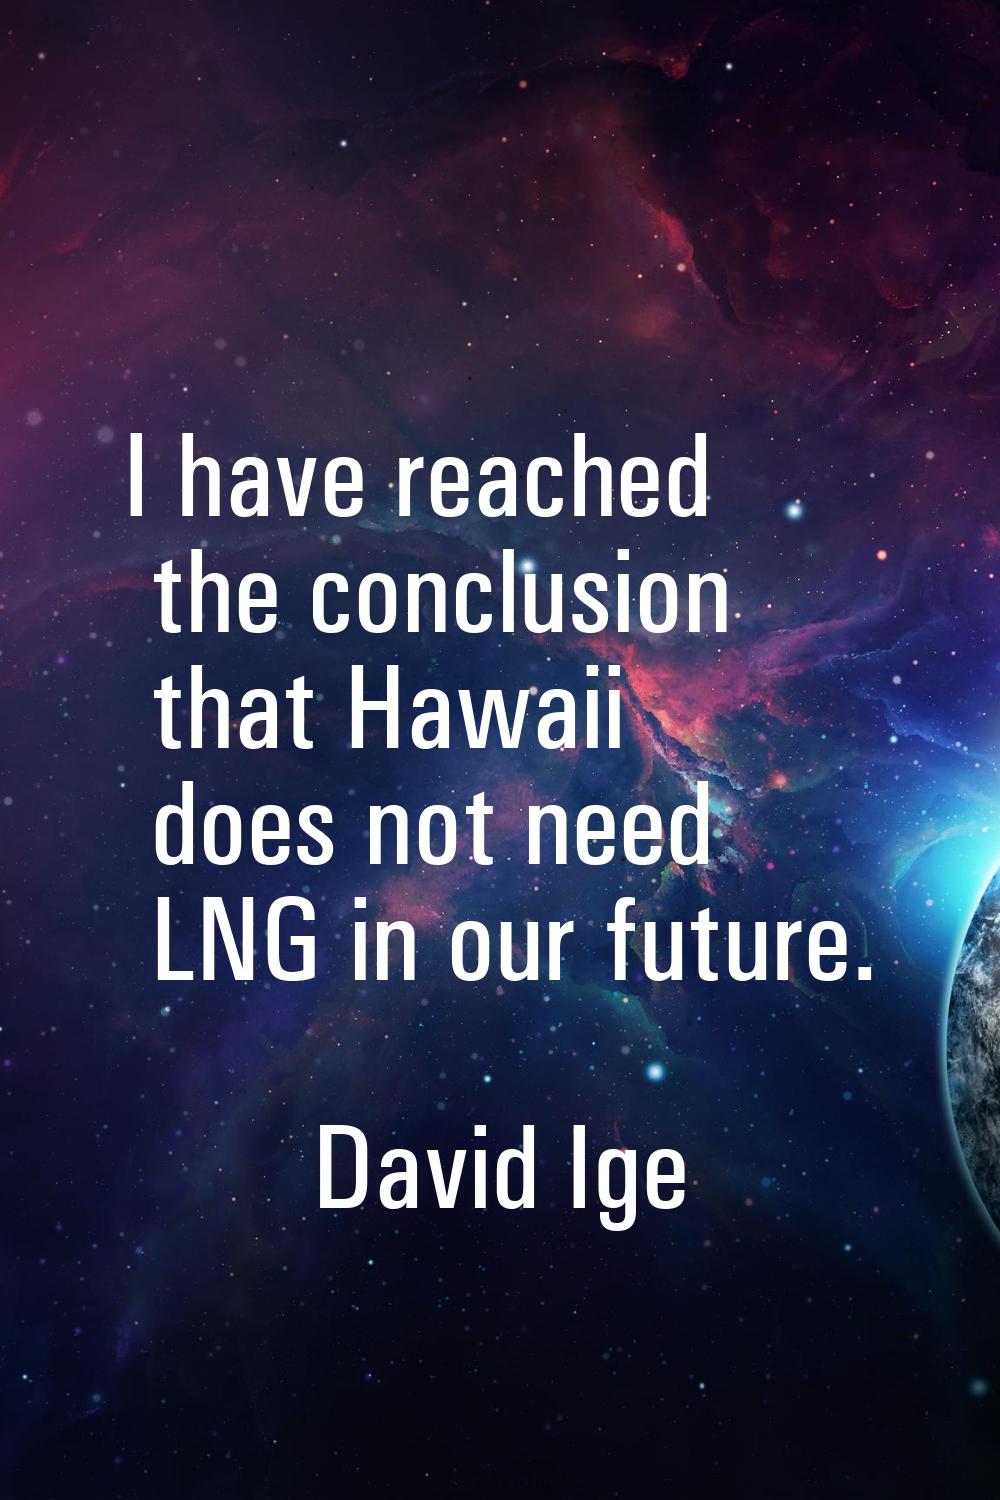 I have reached the conclusion that Hawaii does not need LNG in our future.